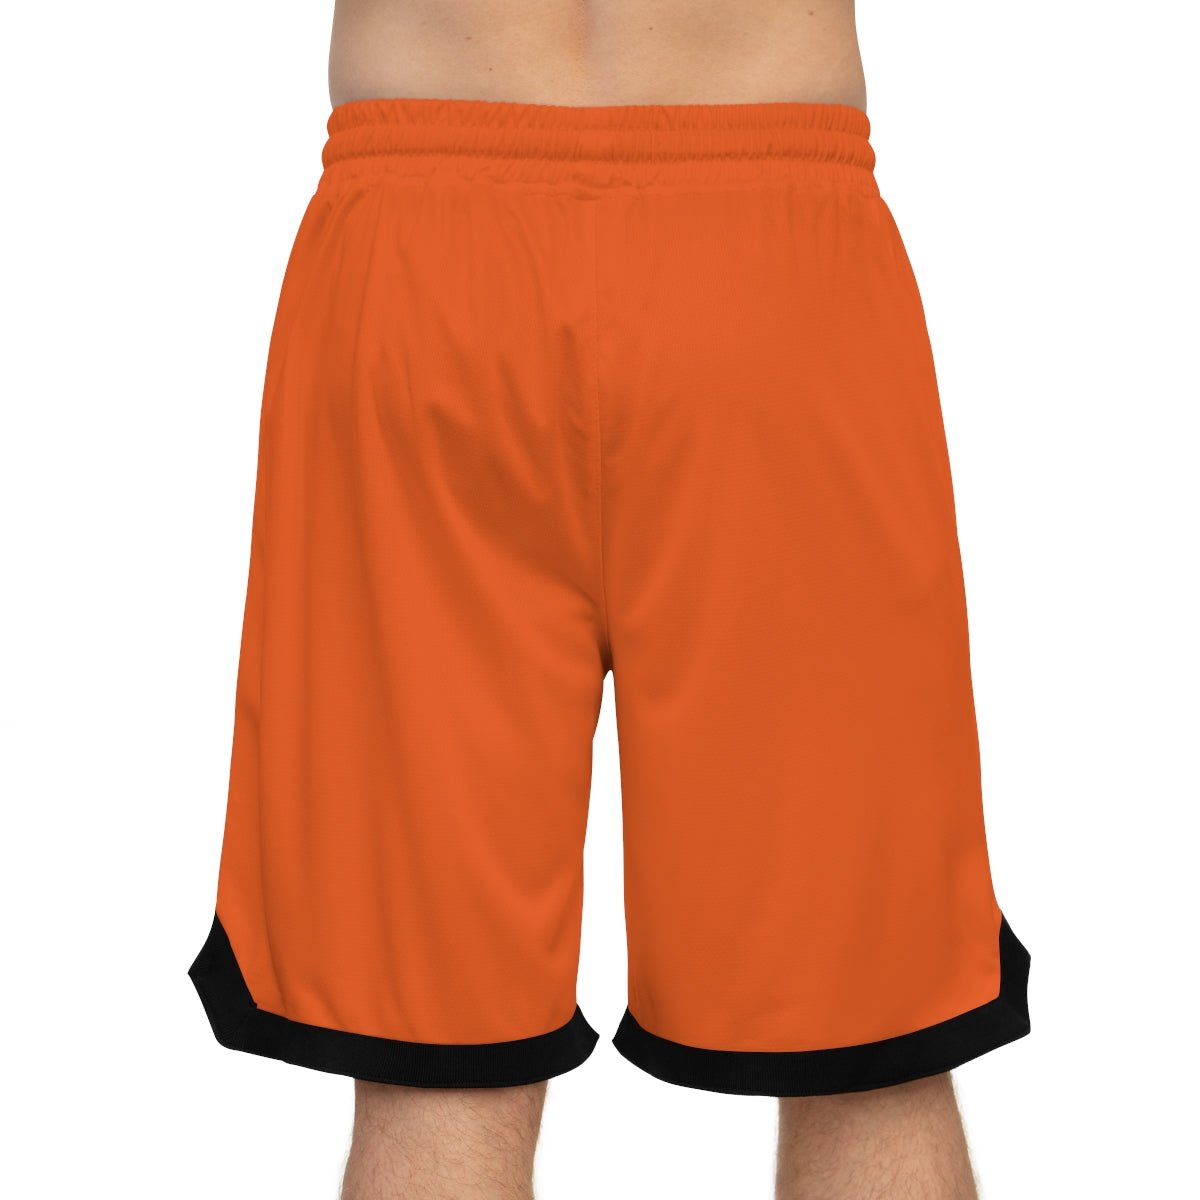 Ninetails Seal Naruto Anime Athletic Shorts w/Pockets - One Punch Fits